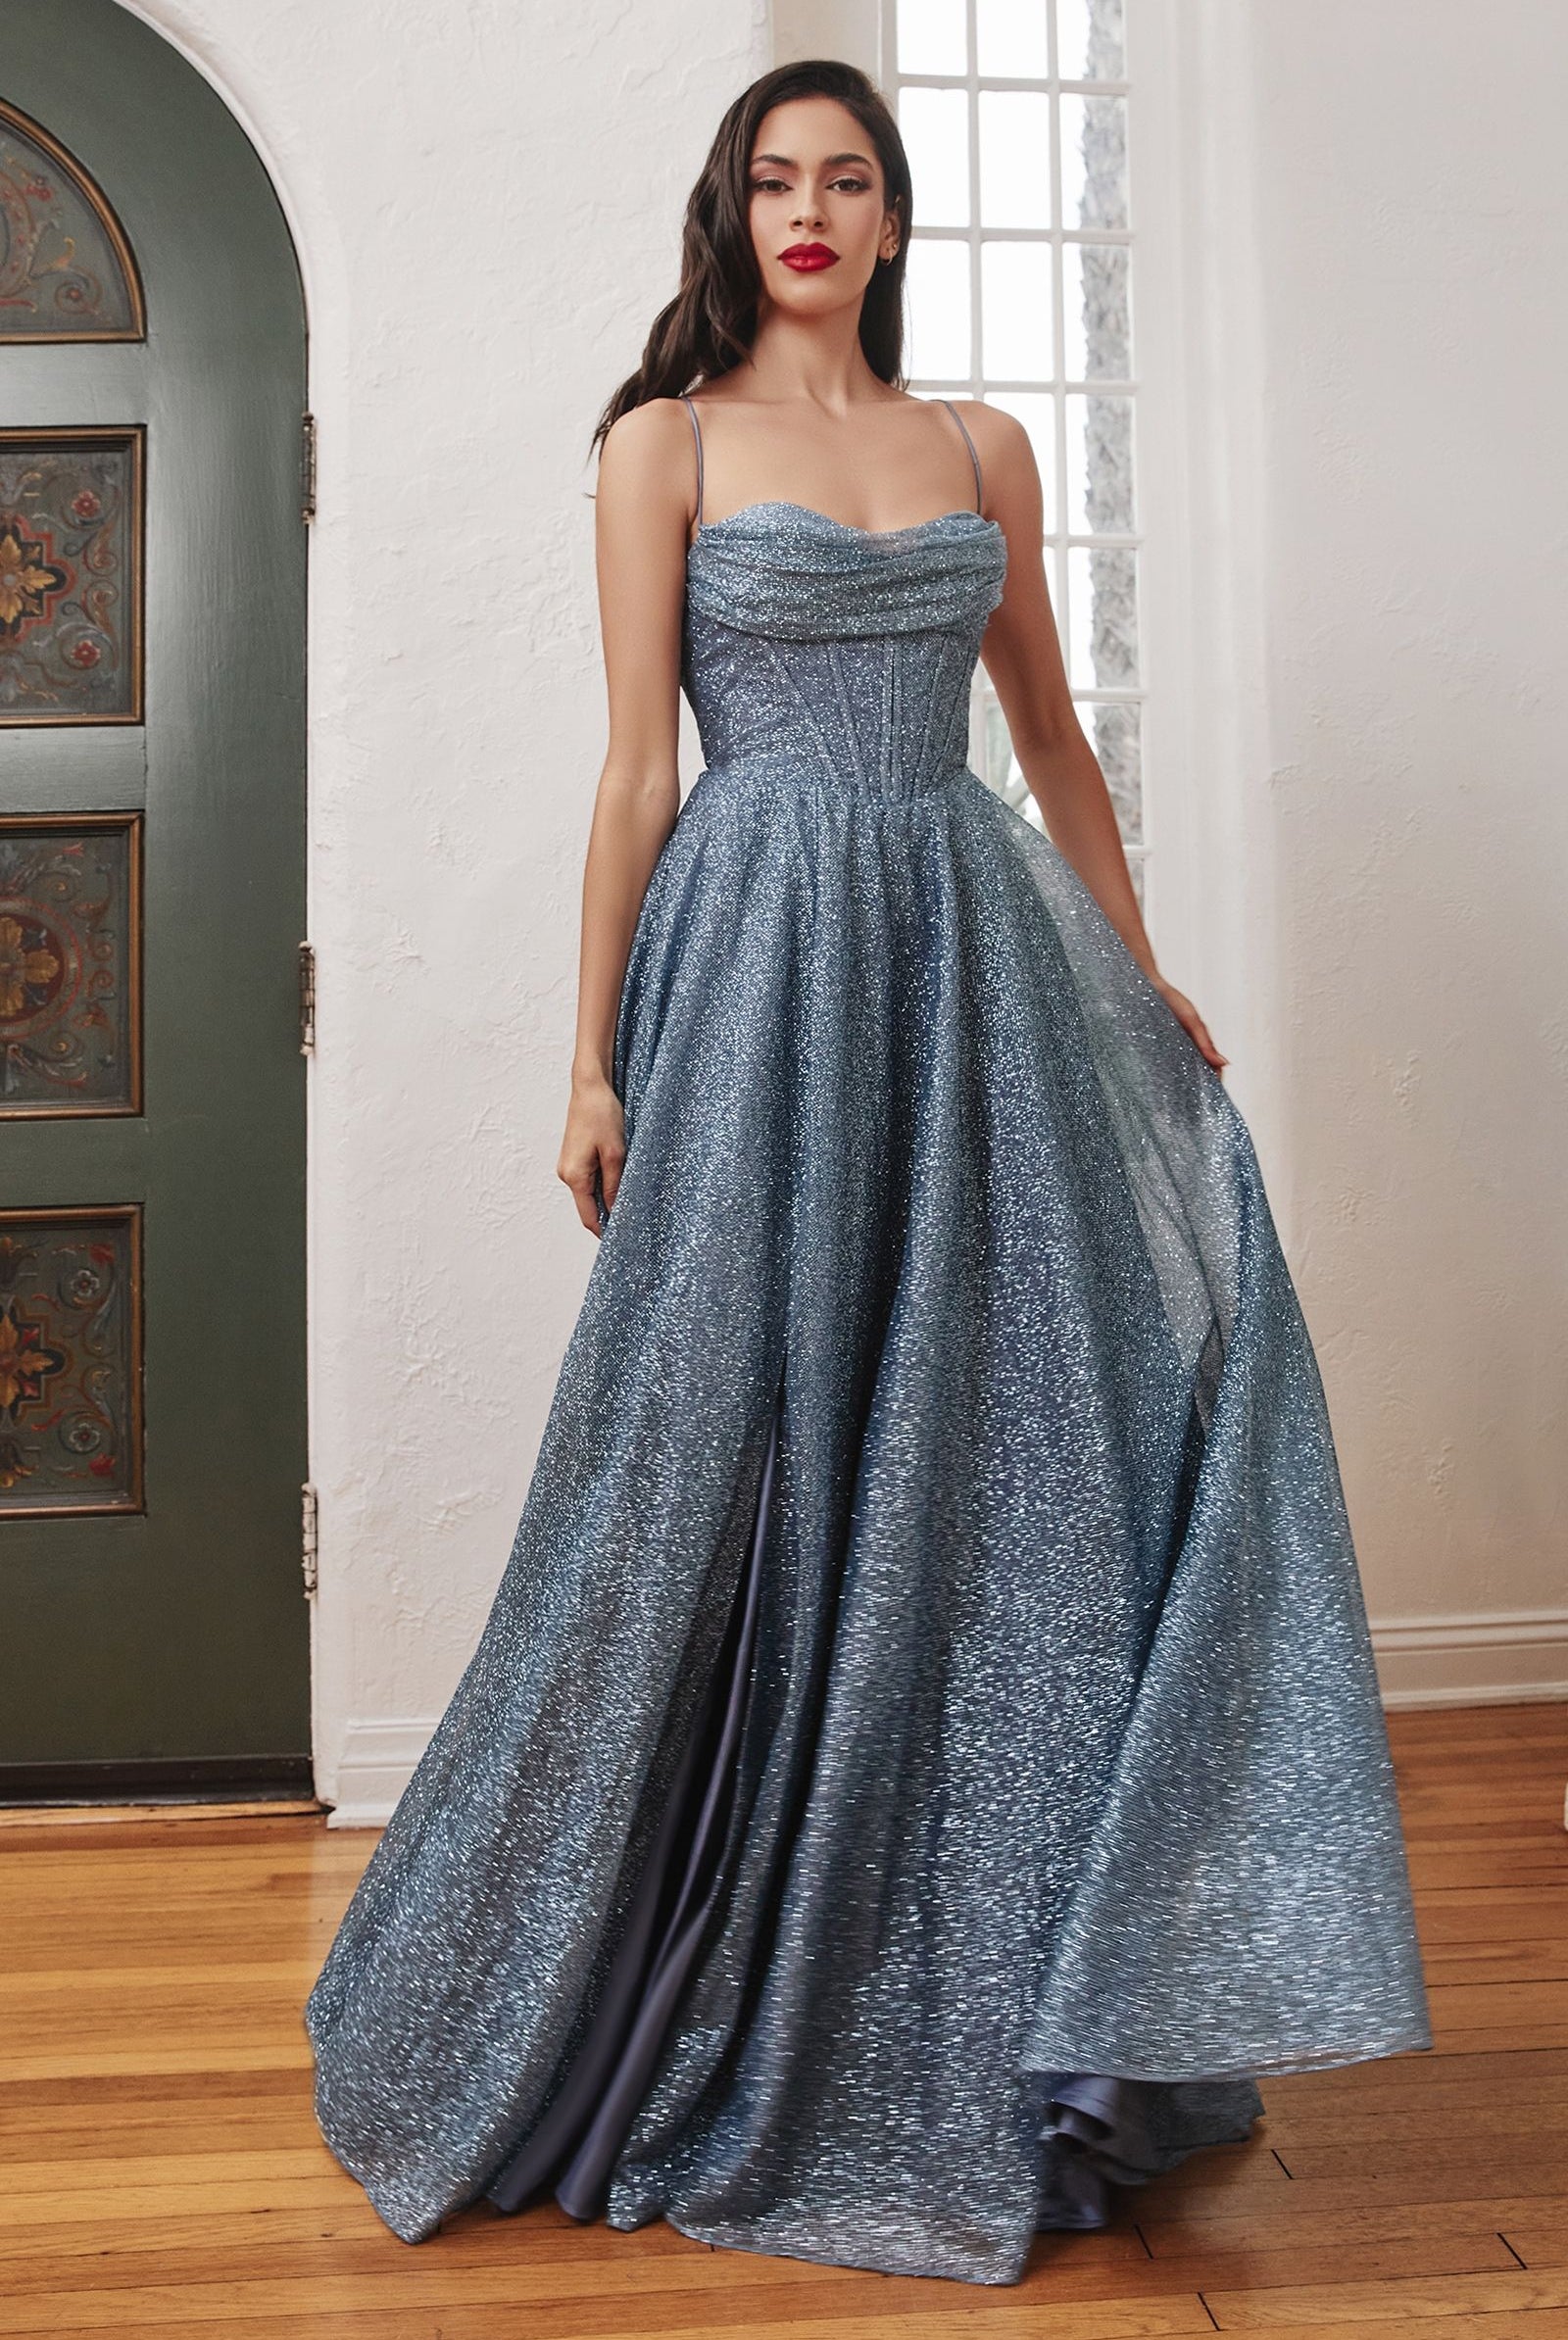 Glitter Ball Gown w/ Lace-Up Corset-smcdress